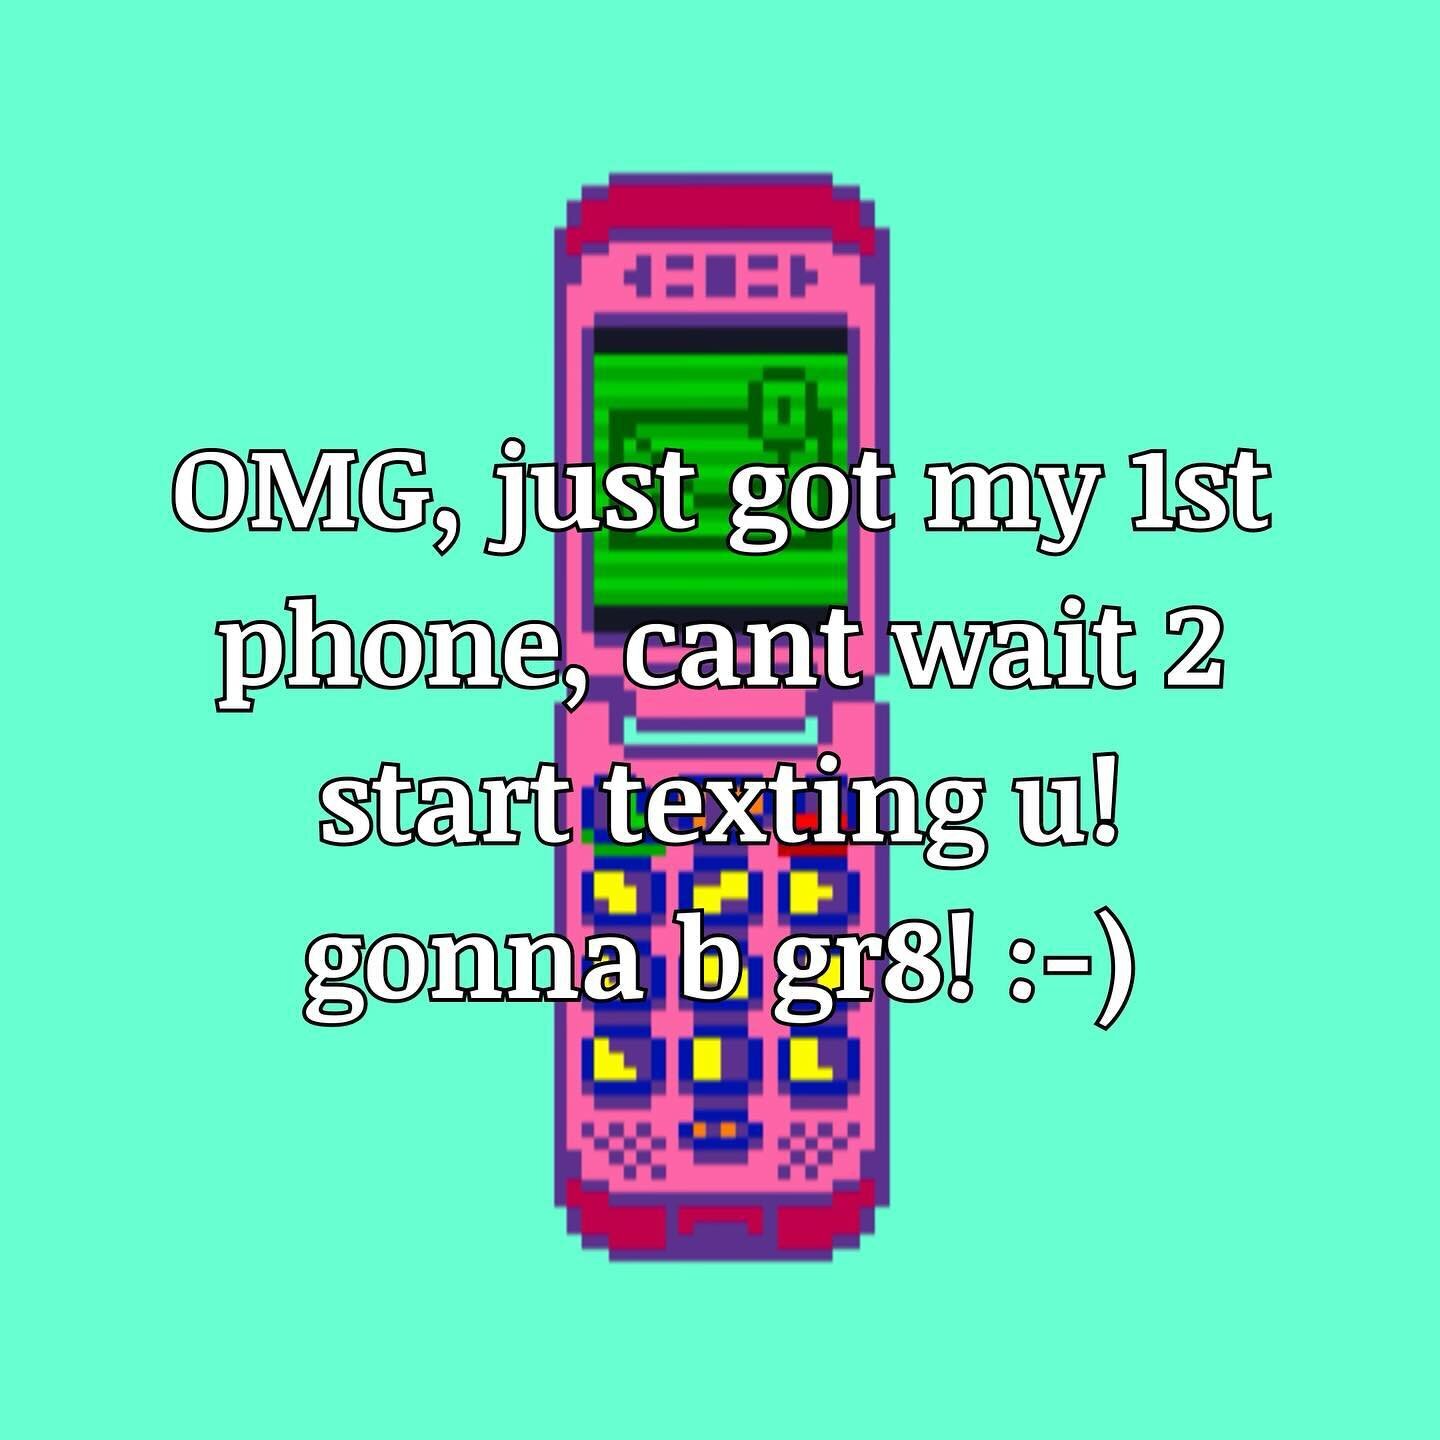 You cringed reading it, we cringed posting it. 🙄

📱 Our SMS program is finally set up! Sign up now so you can stay up to date on theme nights, cancelations, and new trivia nights!

Max of 1 text per week. We totes (sry) get how annoying these can b